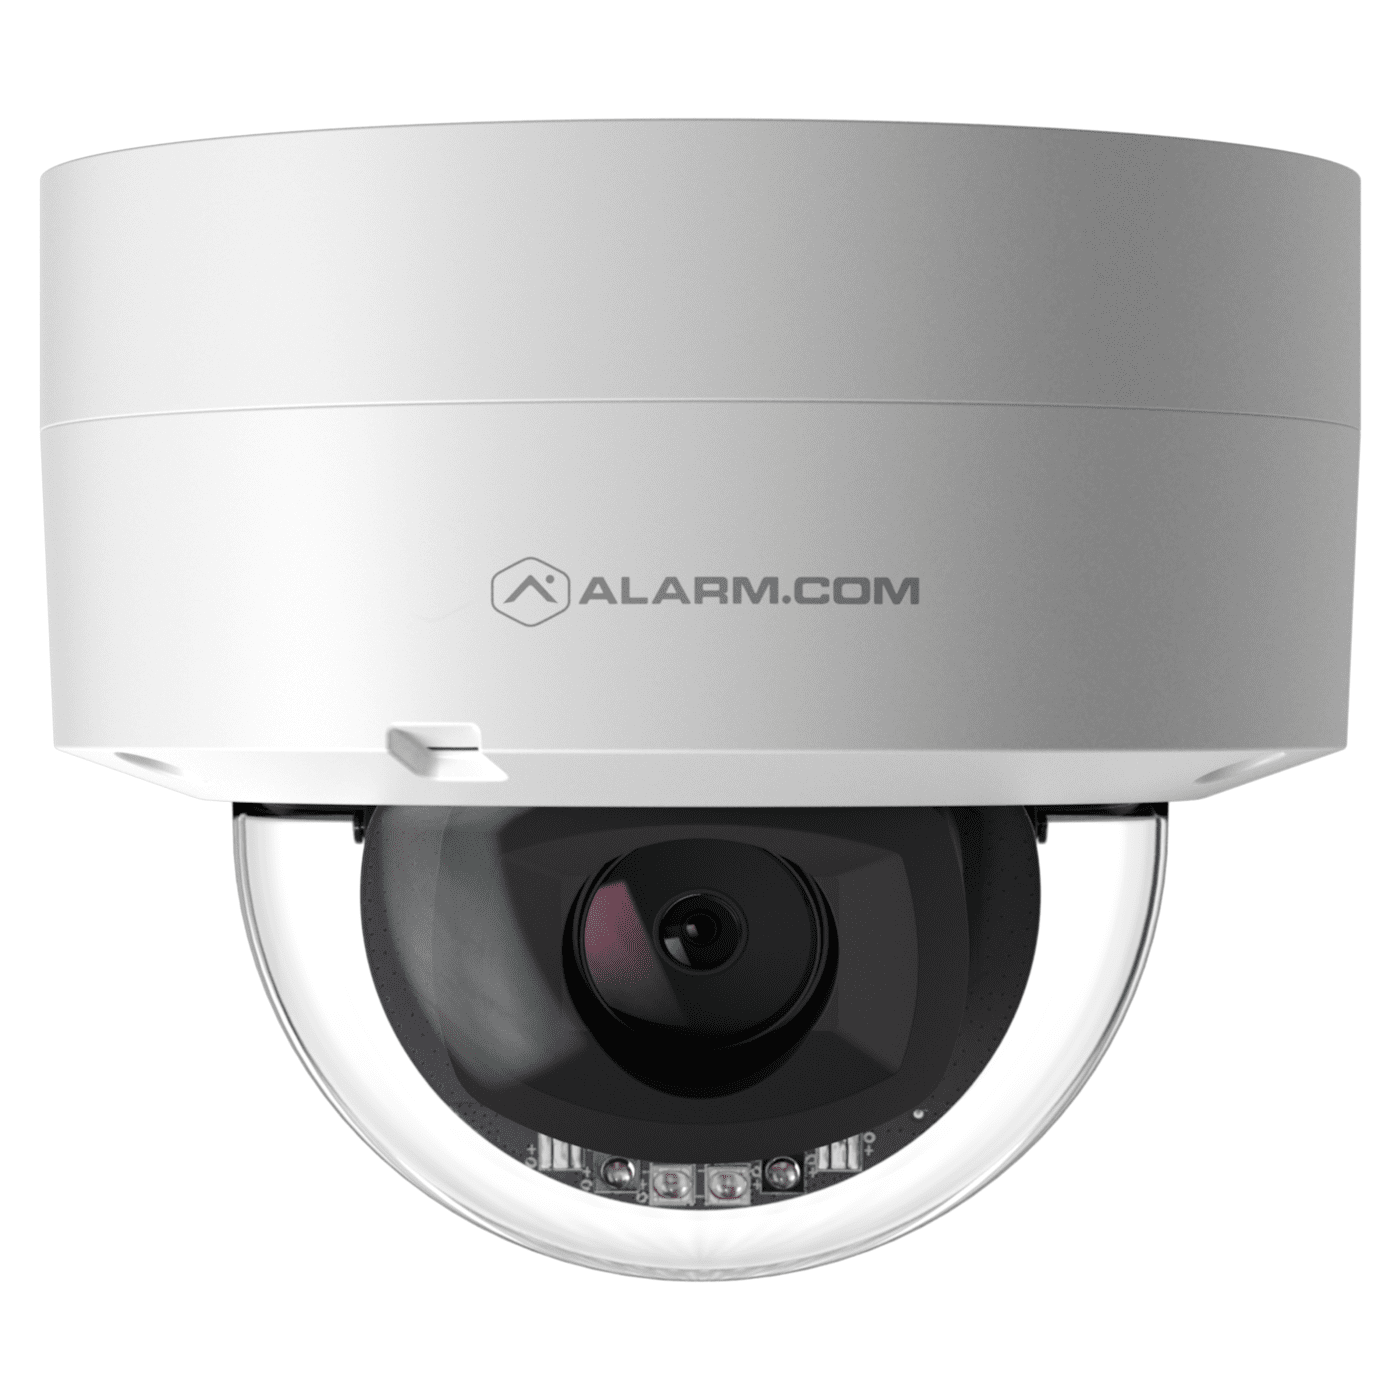 Alarm.com Pro Series Indoor/Outdoor Varifocal Lens 2MP Dome PoE Security Camera ADC-VC847PF